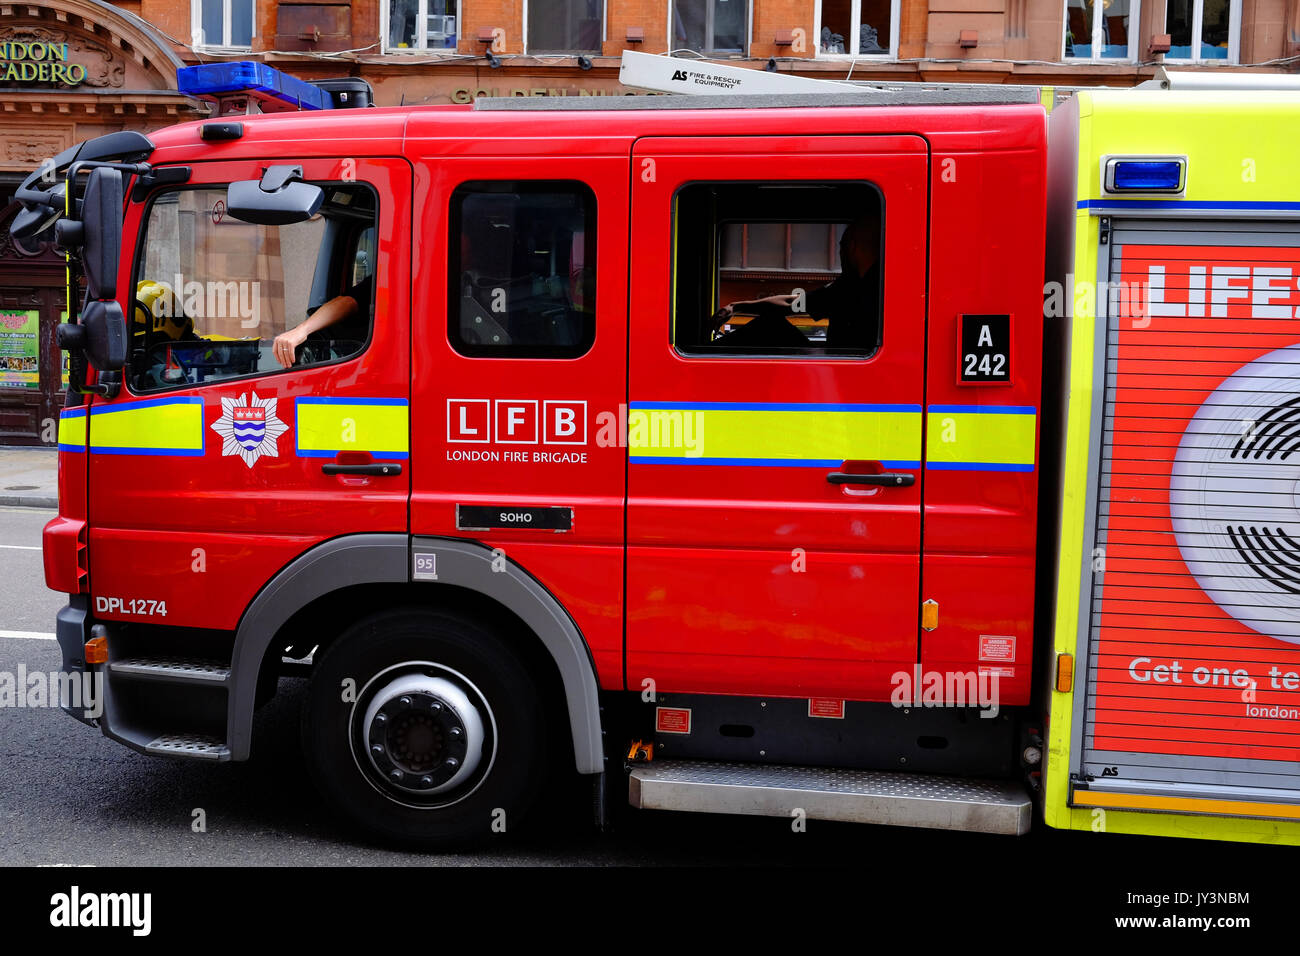 A fire engine of the London Fire Brigade returns along Shaftesbury Avene in London's West End, to Soho Fire Station Stock Photo